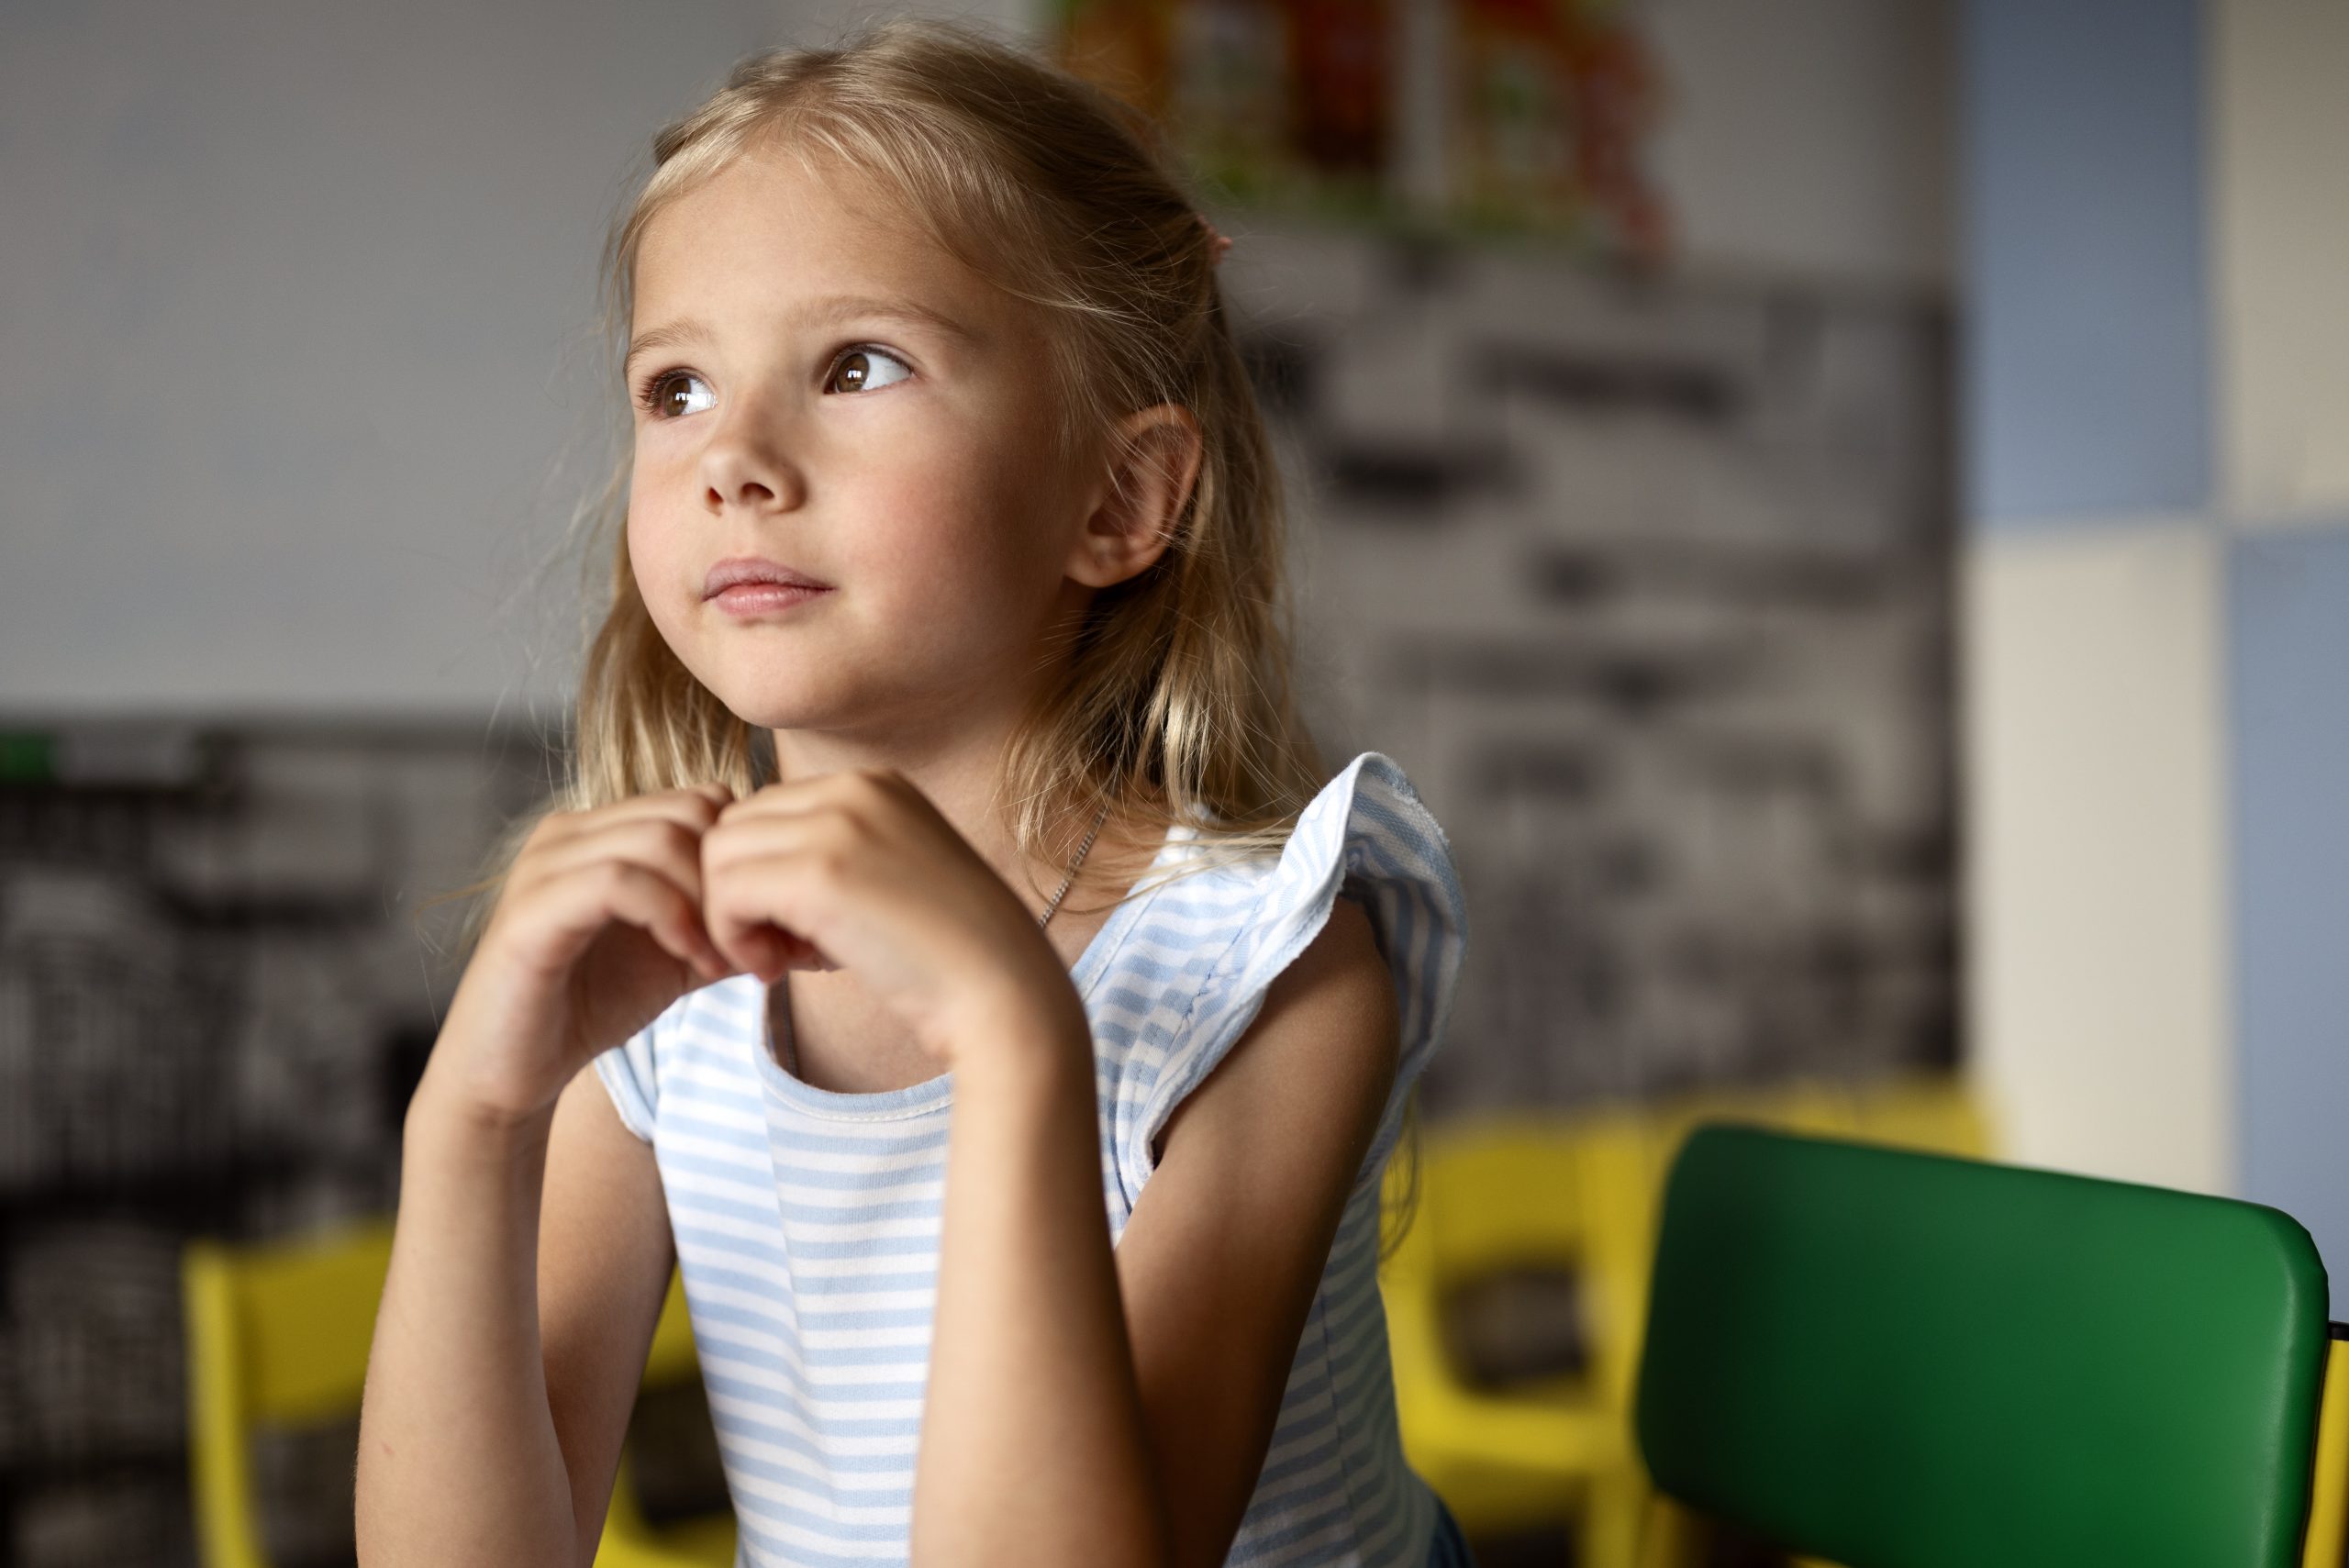 Young girl in striped dress sitting thoughtfully in a classroom with colorful chairs. 